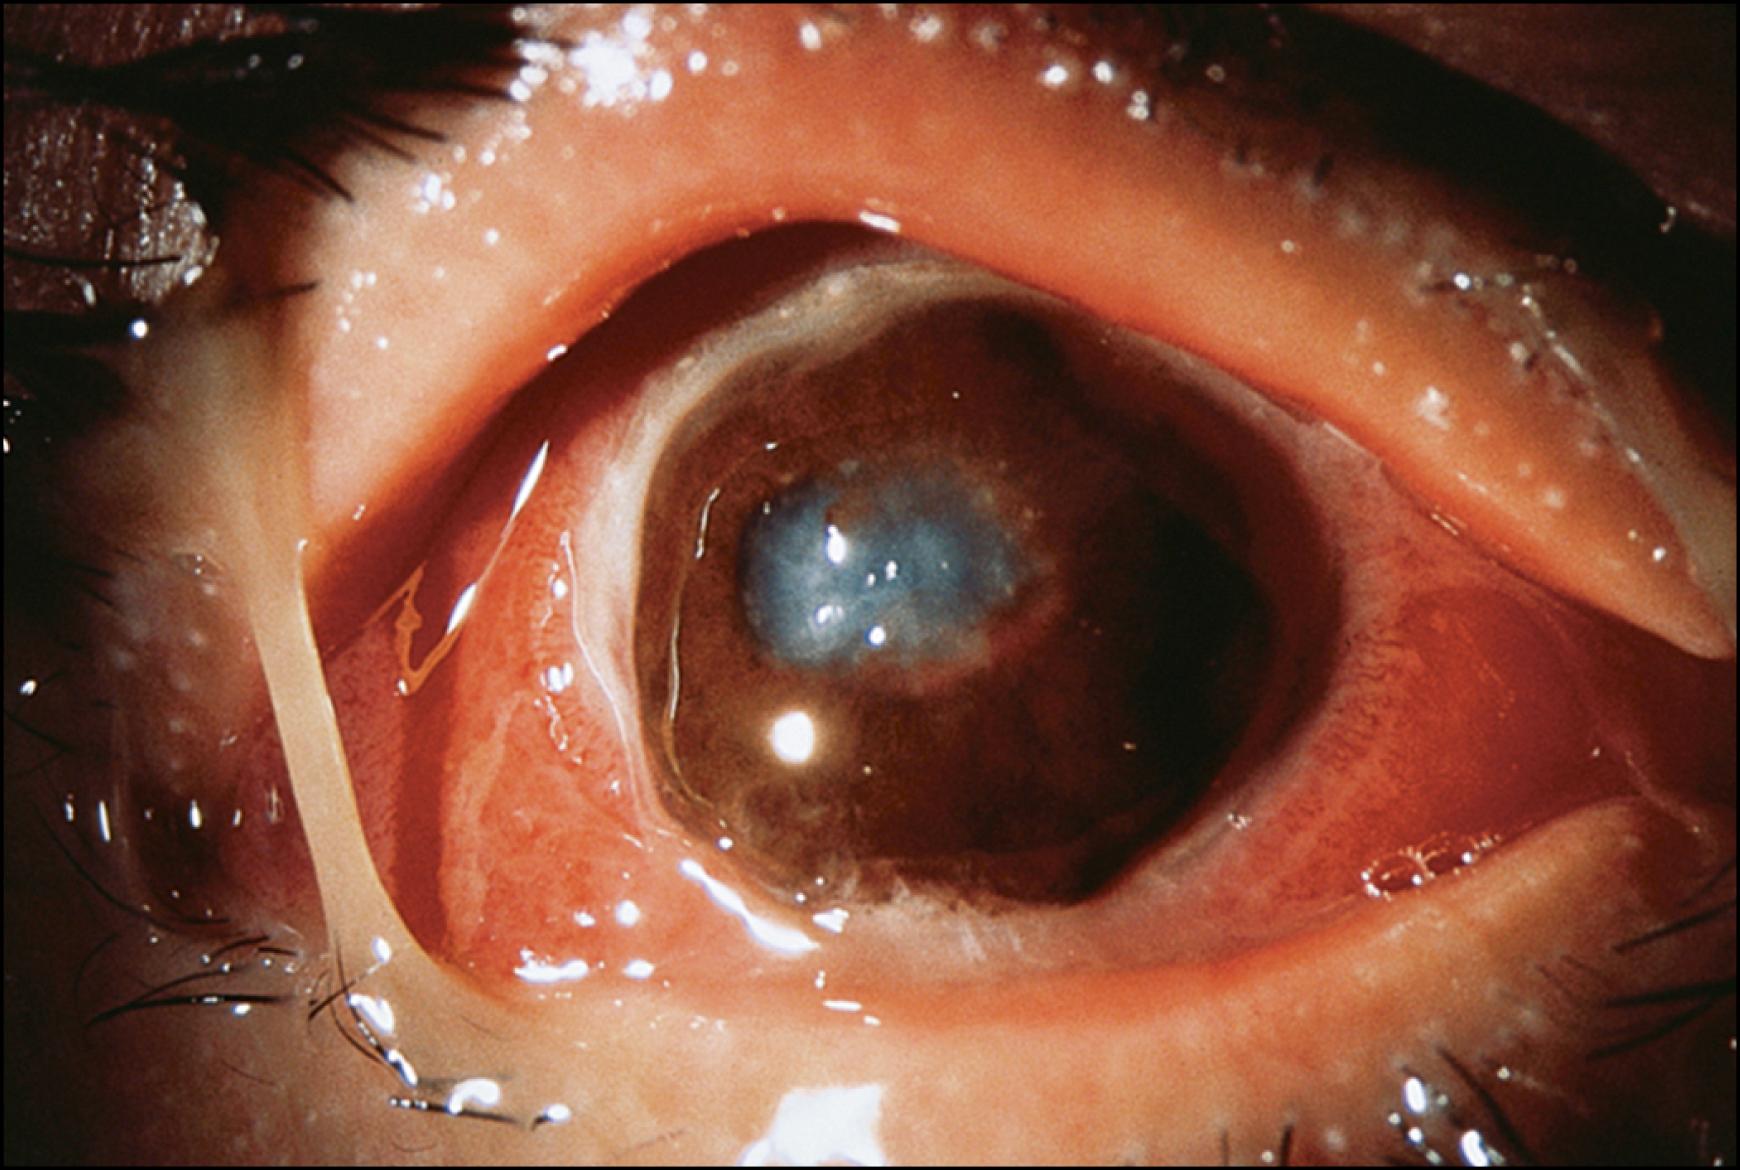 Fig. 88.1, Complete corneal necrosis secondary to topical anesthetic abuse.